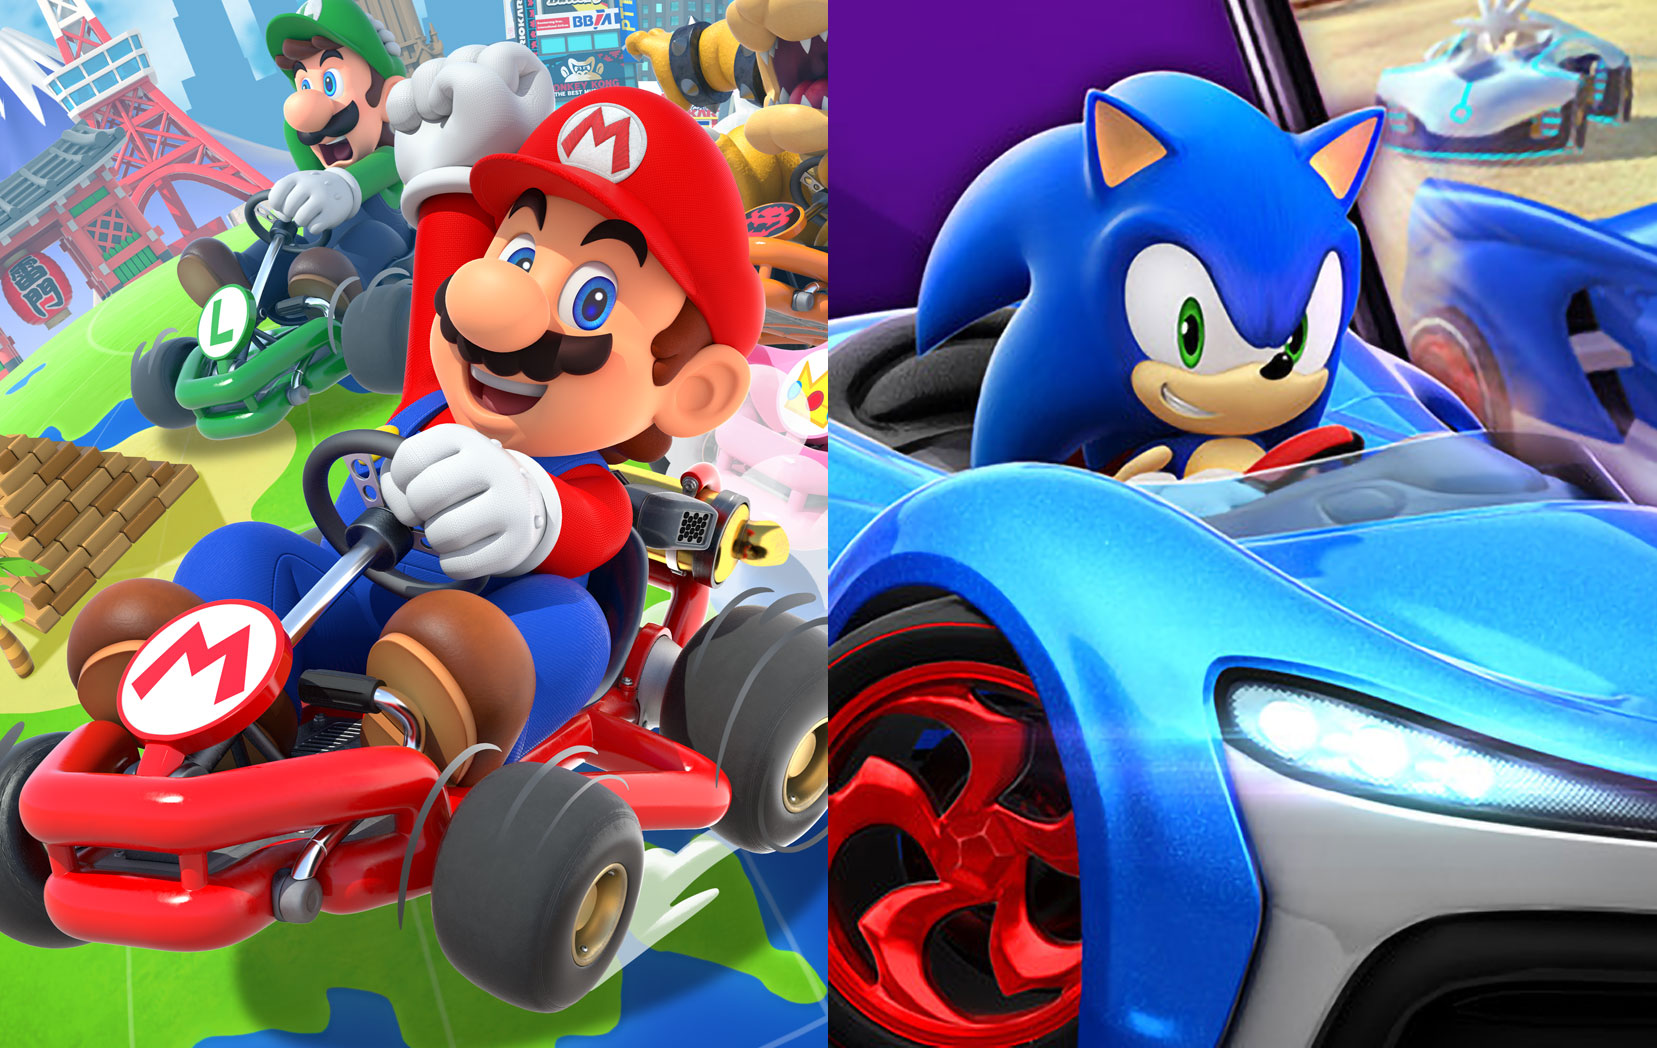 Sonic and Mario riding go-karts next to each other, in an image that shows both characters from their respective games. 